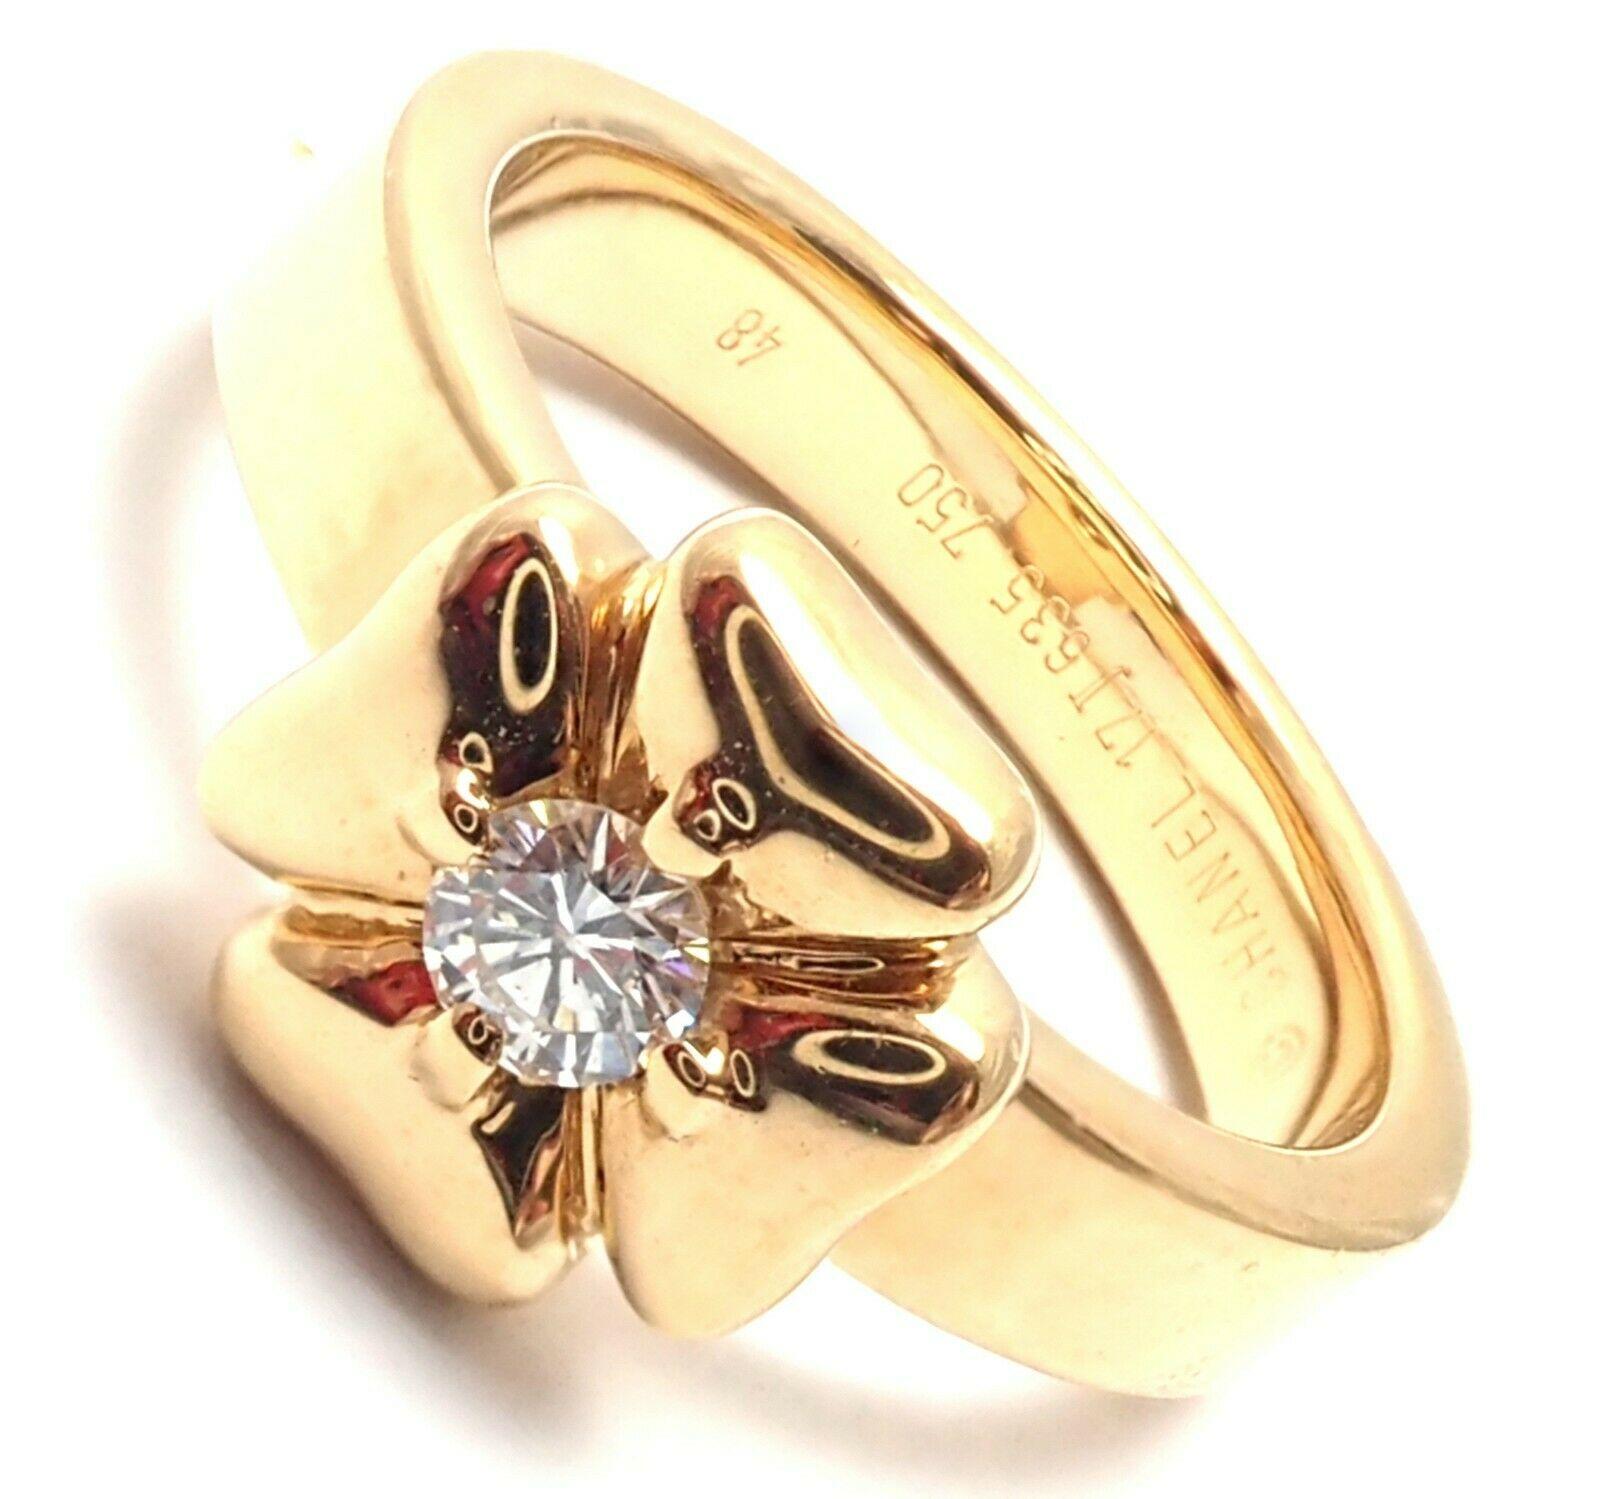 18k Yellow Gold Diamond Four Leaf Clover Band Ring by Chanel. 
With 1 Round Brilliant Cut Diamond Total Weight Approximately 0.12 ct. Diamond is G color and VS1 clarity.
Details:
Ring Size: US - 4.25. French - 48
Width: 3.5mm
Thickness: 1.5mm